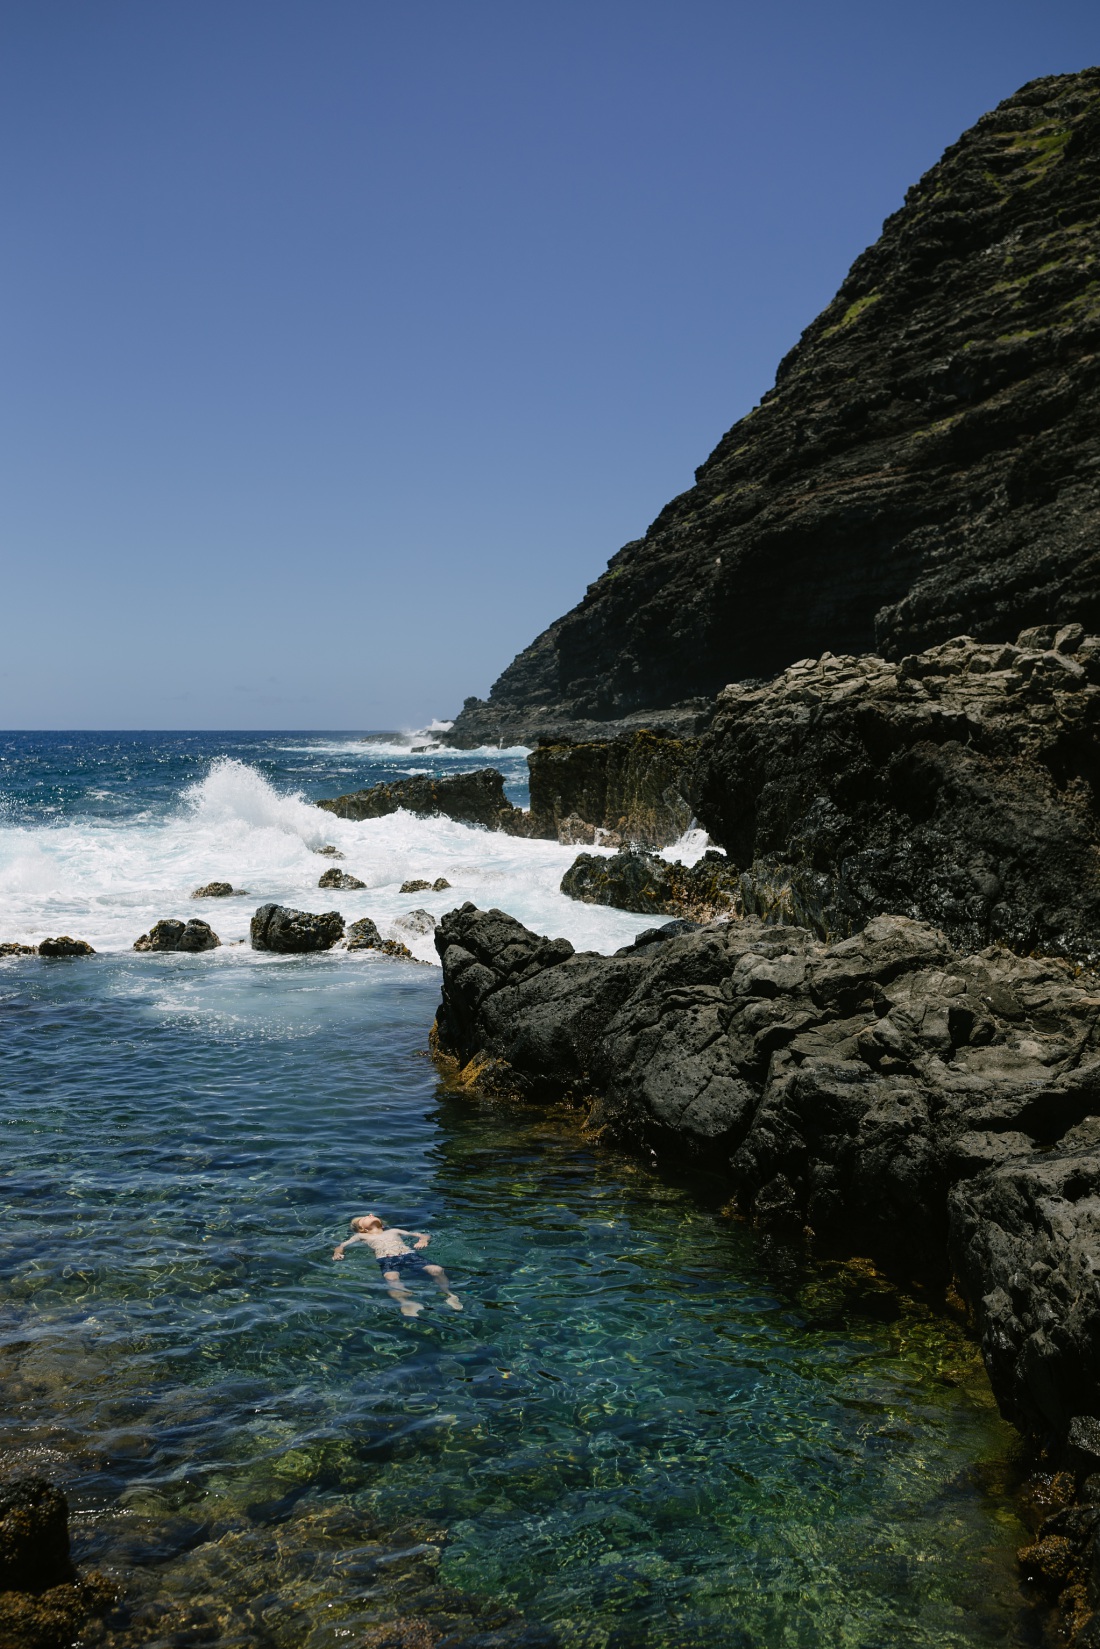 boy floating in the tide pools at the makapuu trail with cliffs in the background